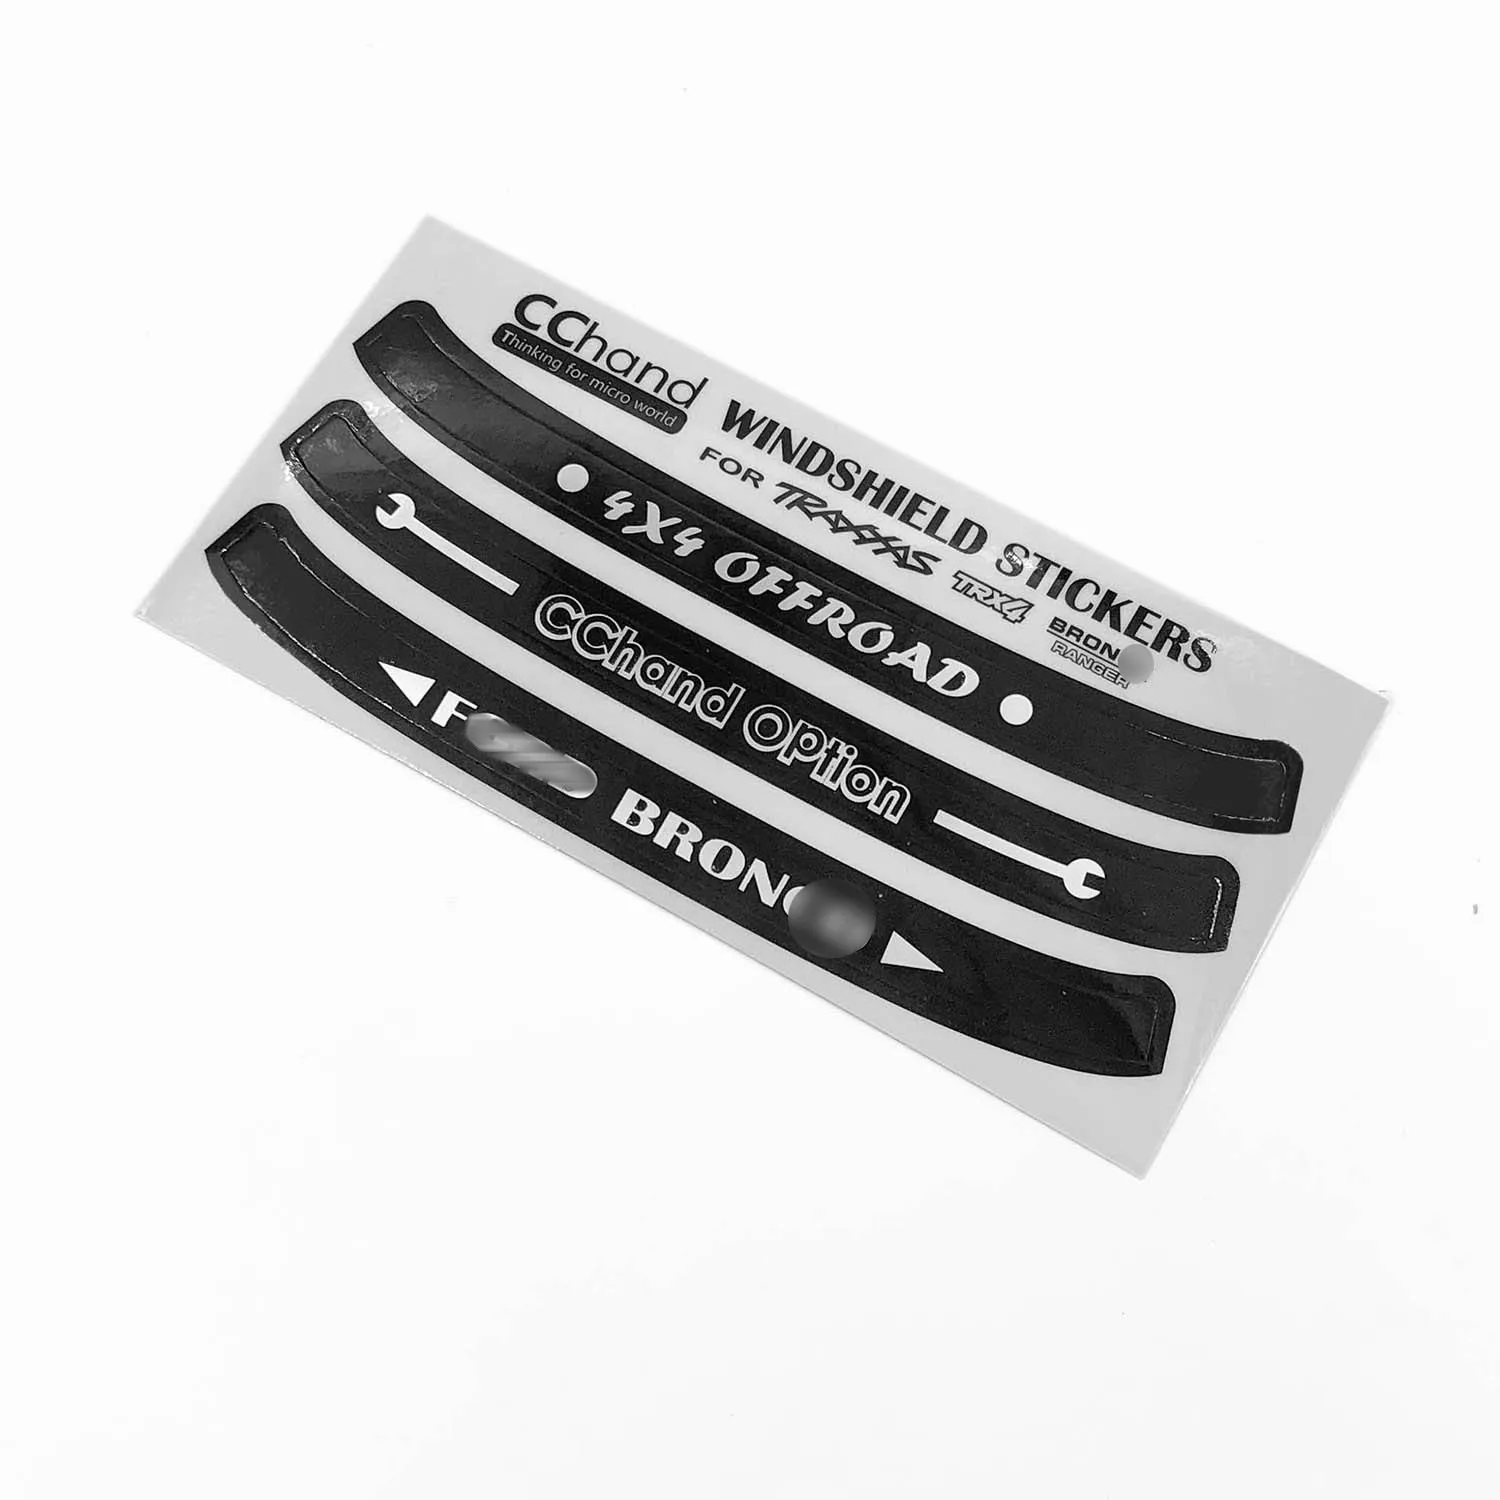 

CCHand Parts Windshield Stickers for 1/10 Forde TRAXXAS BRONCOOO 79 RC Crawler Car Toucan Accessories TH21030-SMT8